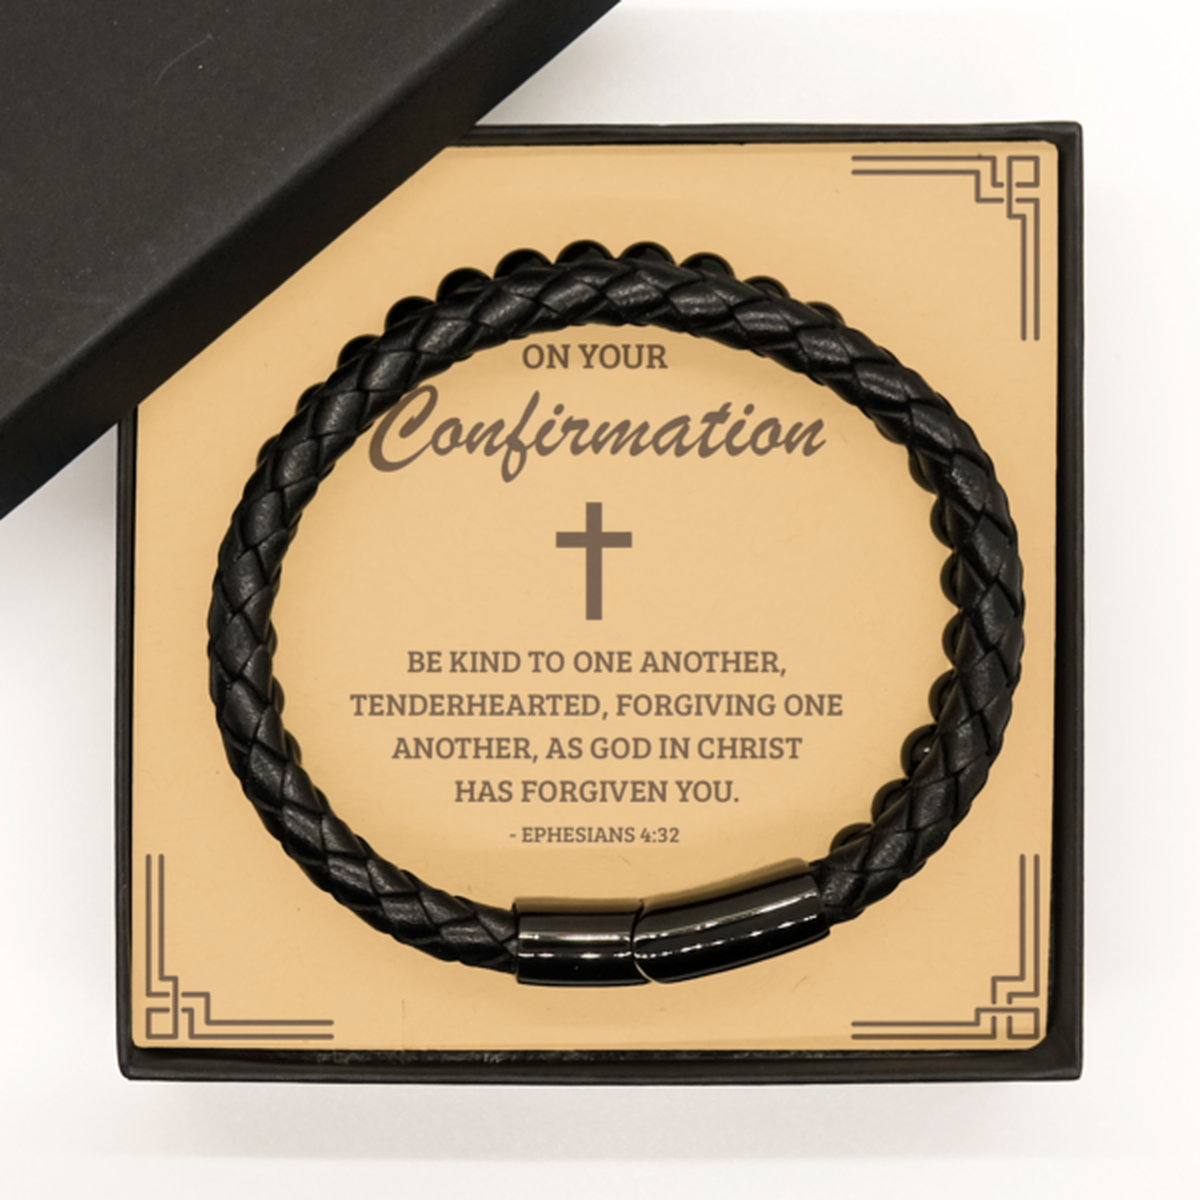 Confirmation Gifts for Teenage Boys, Be kind to one another, Stone Leather Bracelet with Bible Verse Message Card, Religious Catholic Bracelet for Son, Grandson, Dad, Godfather